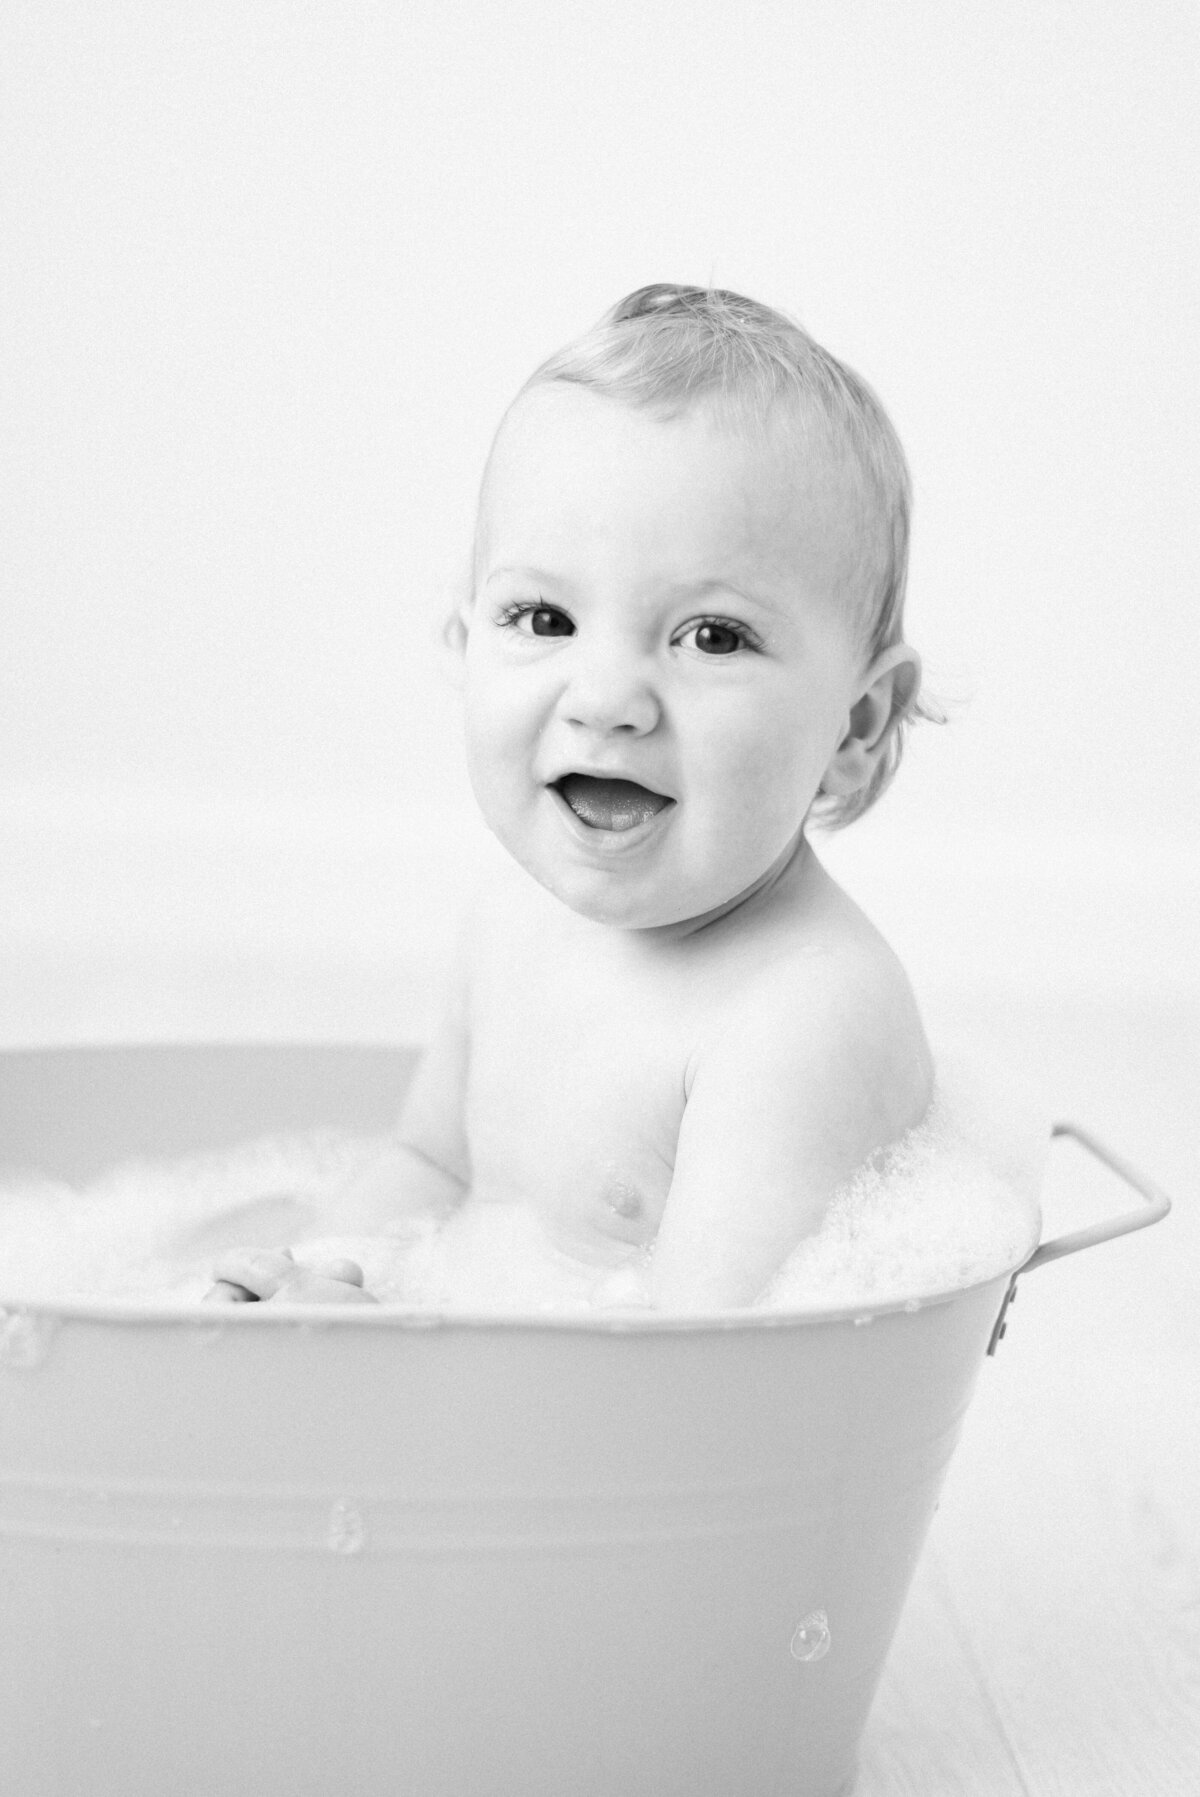 Baby boy in a bubble bath smiling during cake smash photoshoot in Billingshurst